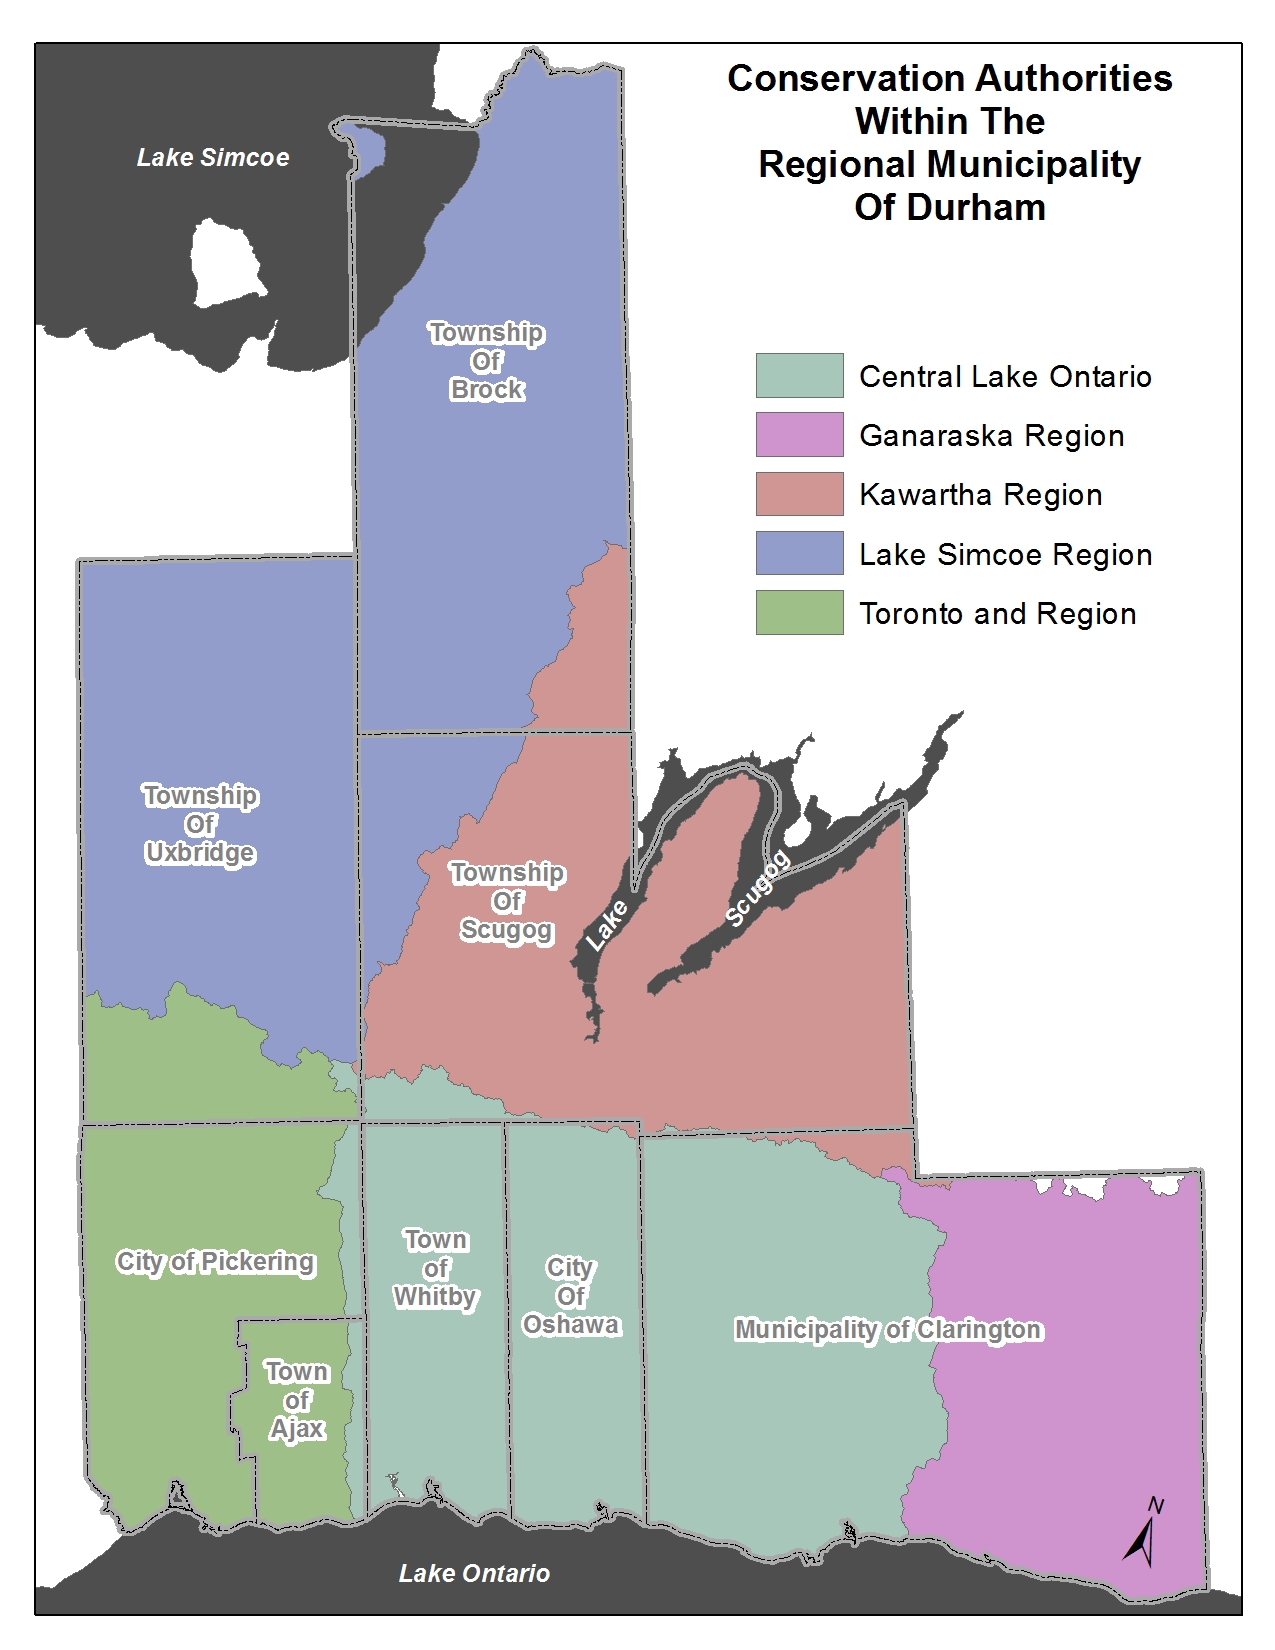 Map of the five conservation authorities in Durham Region. Uxbridge: Lake Simcoe and Toronto and Region. Township of Brock: Lake Simcoe and Kawartha Region. Township of Scugog:Lake Simcoe and Kawartha Region.  City of Pickering: Toronto and Region, Central Lake Ontario. Town of Ajax: Toronto and Region, Central Lake. Town of Whitby: Central Lake. City of Oshawa: Central Lake. Municipality of Clarington: Central Lake and Ganaraska.